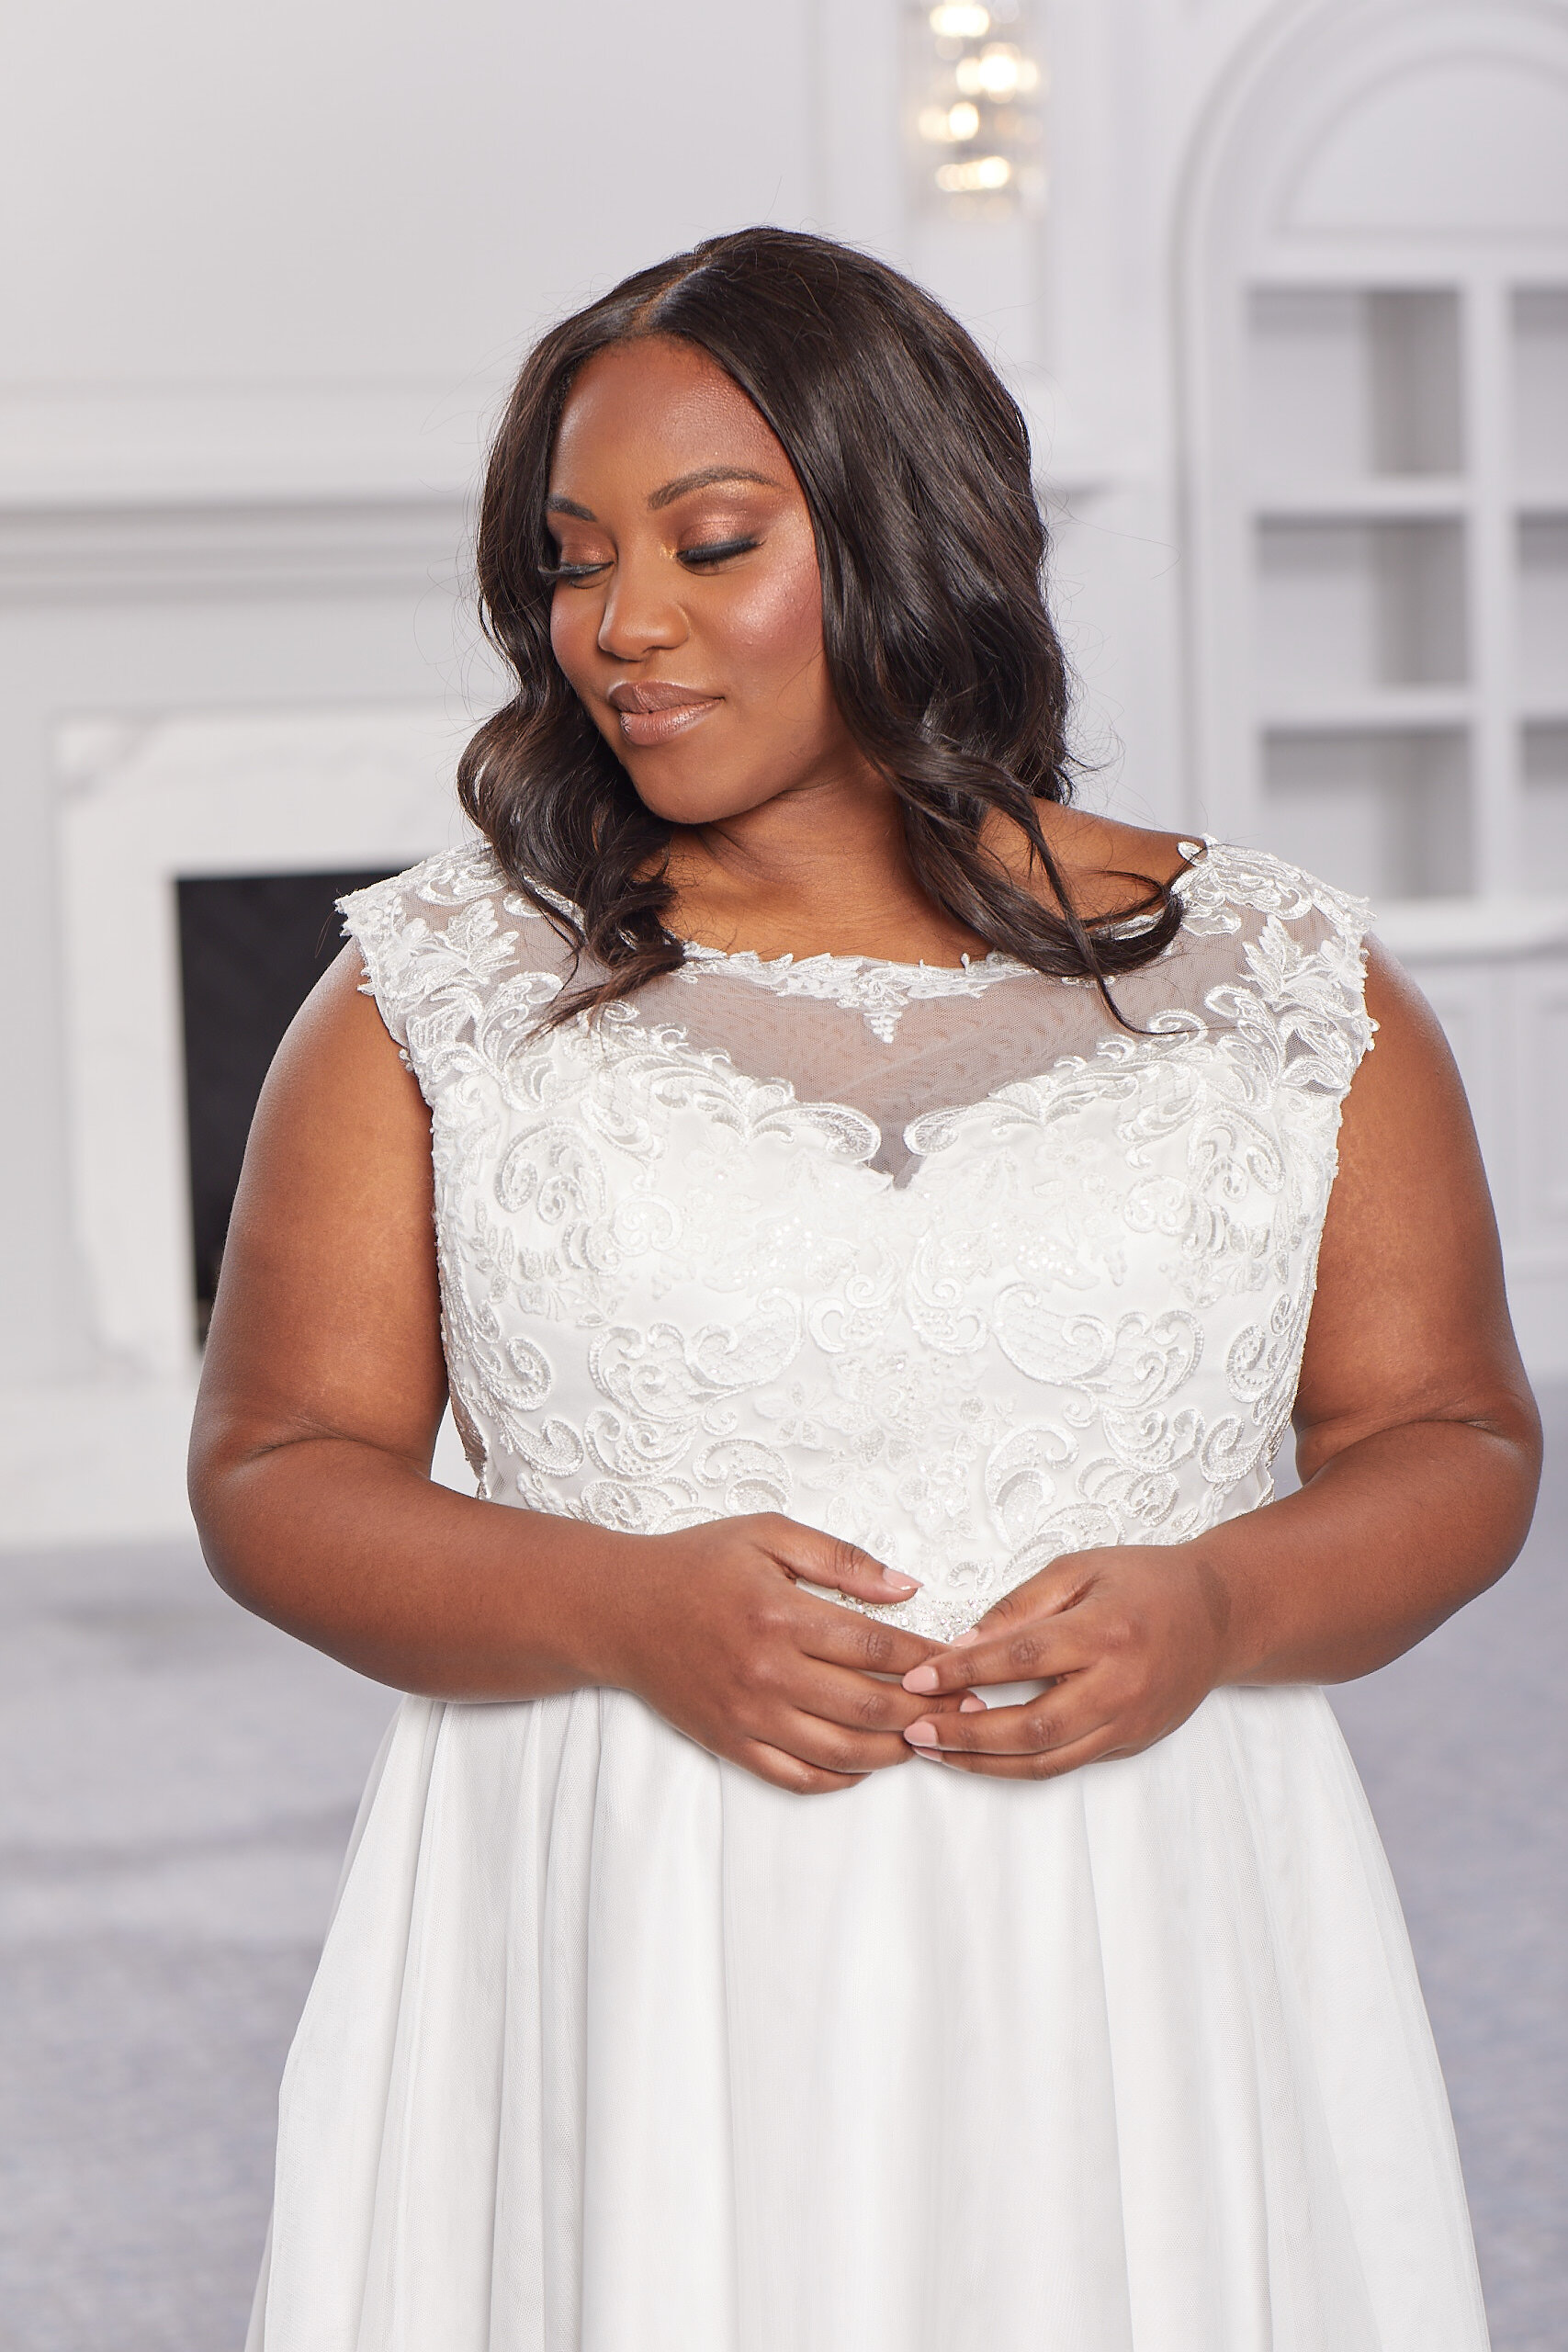 Brides-by-Young-Plus-Size-Bridal-Curvy-Wedding-Dress-New-Jersey-Indiana-Chicago-Illinois-ARIEL_1702.jpg